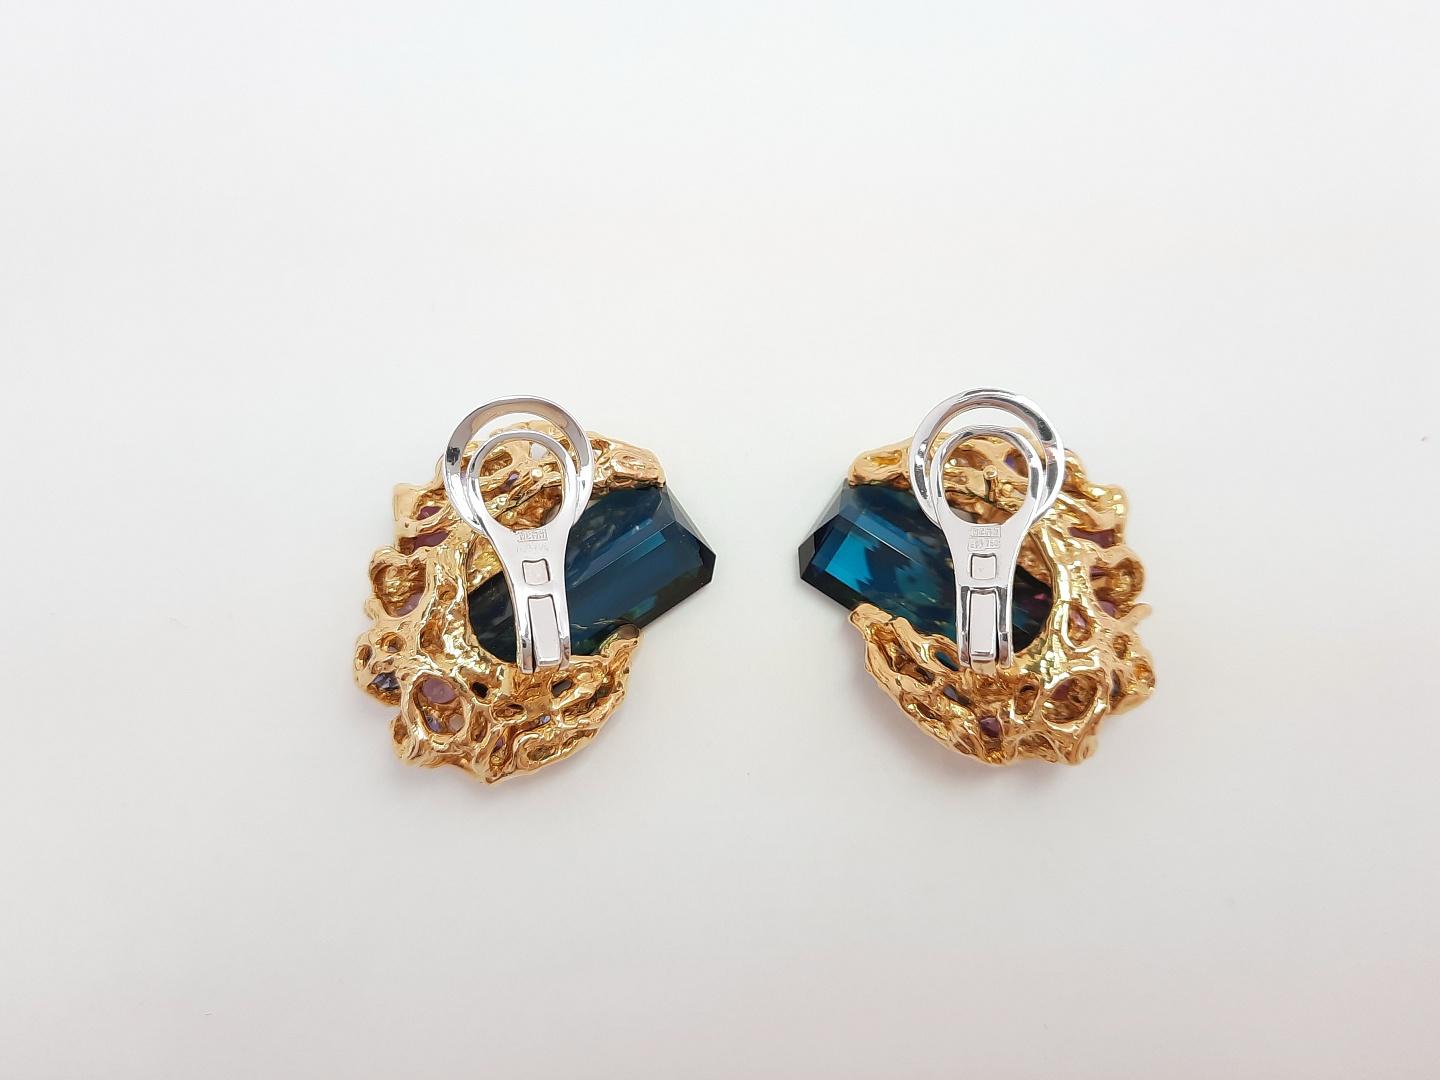 Inspired by Impressionism, MOISEIKIN® has created a blooming flower earrings  in tridimensional manner. Trembling flowers and sweet fragrance of coming ripe fruits are embodied  in gems and metals. Inside the designed flowers petals are a pair of